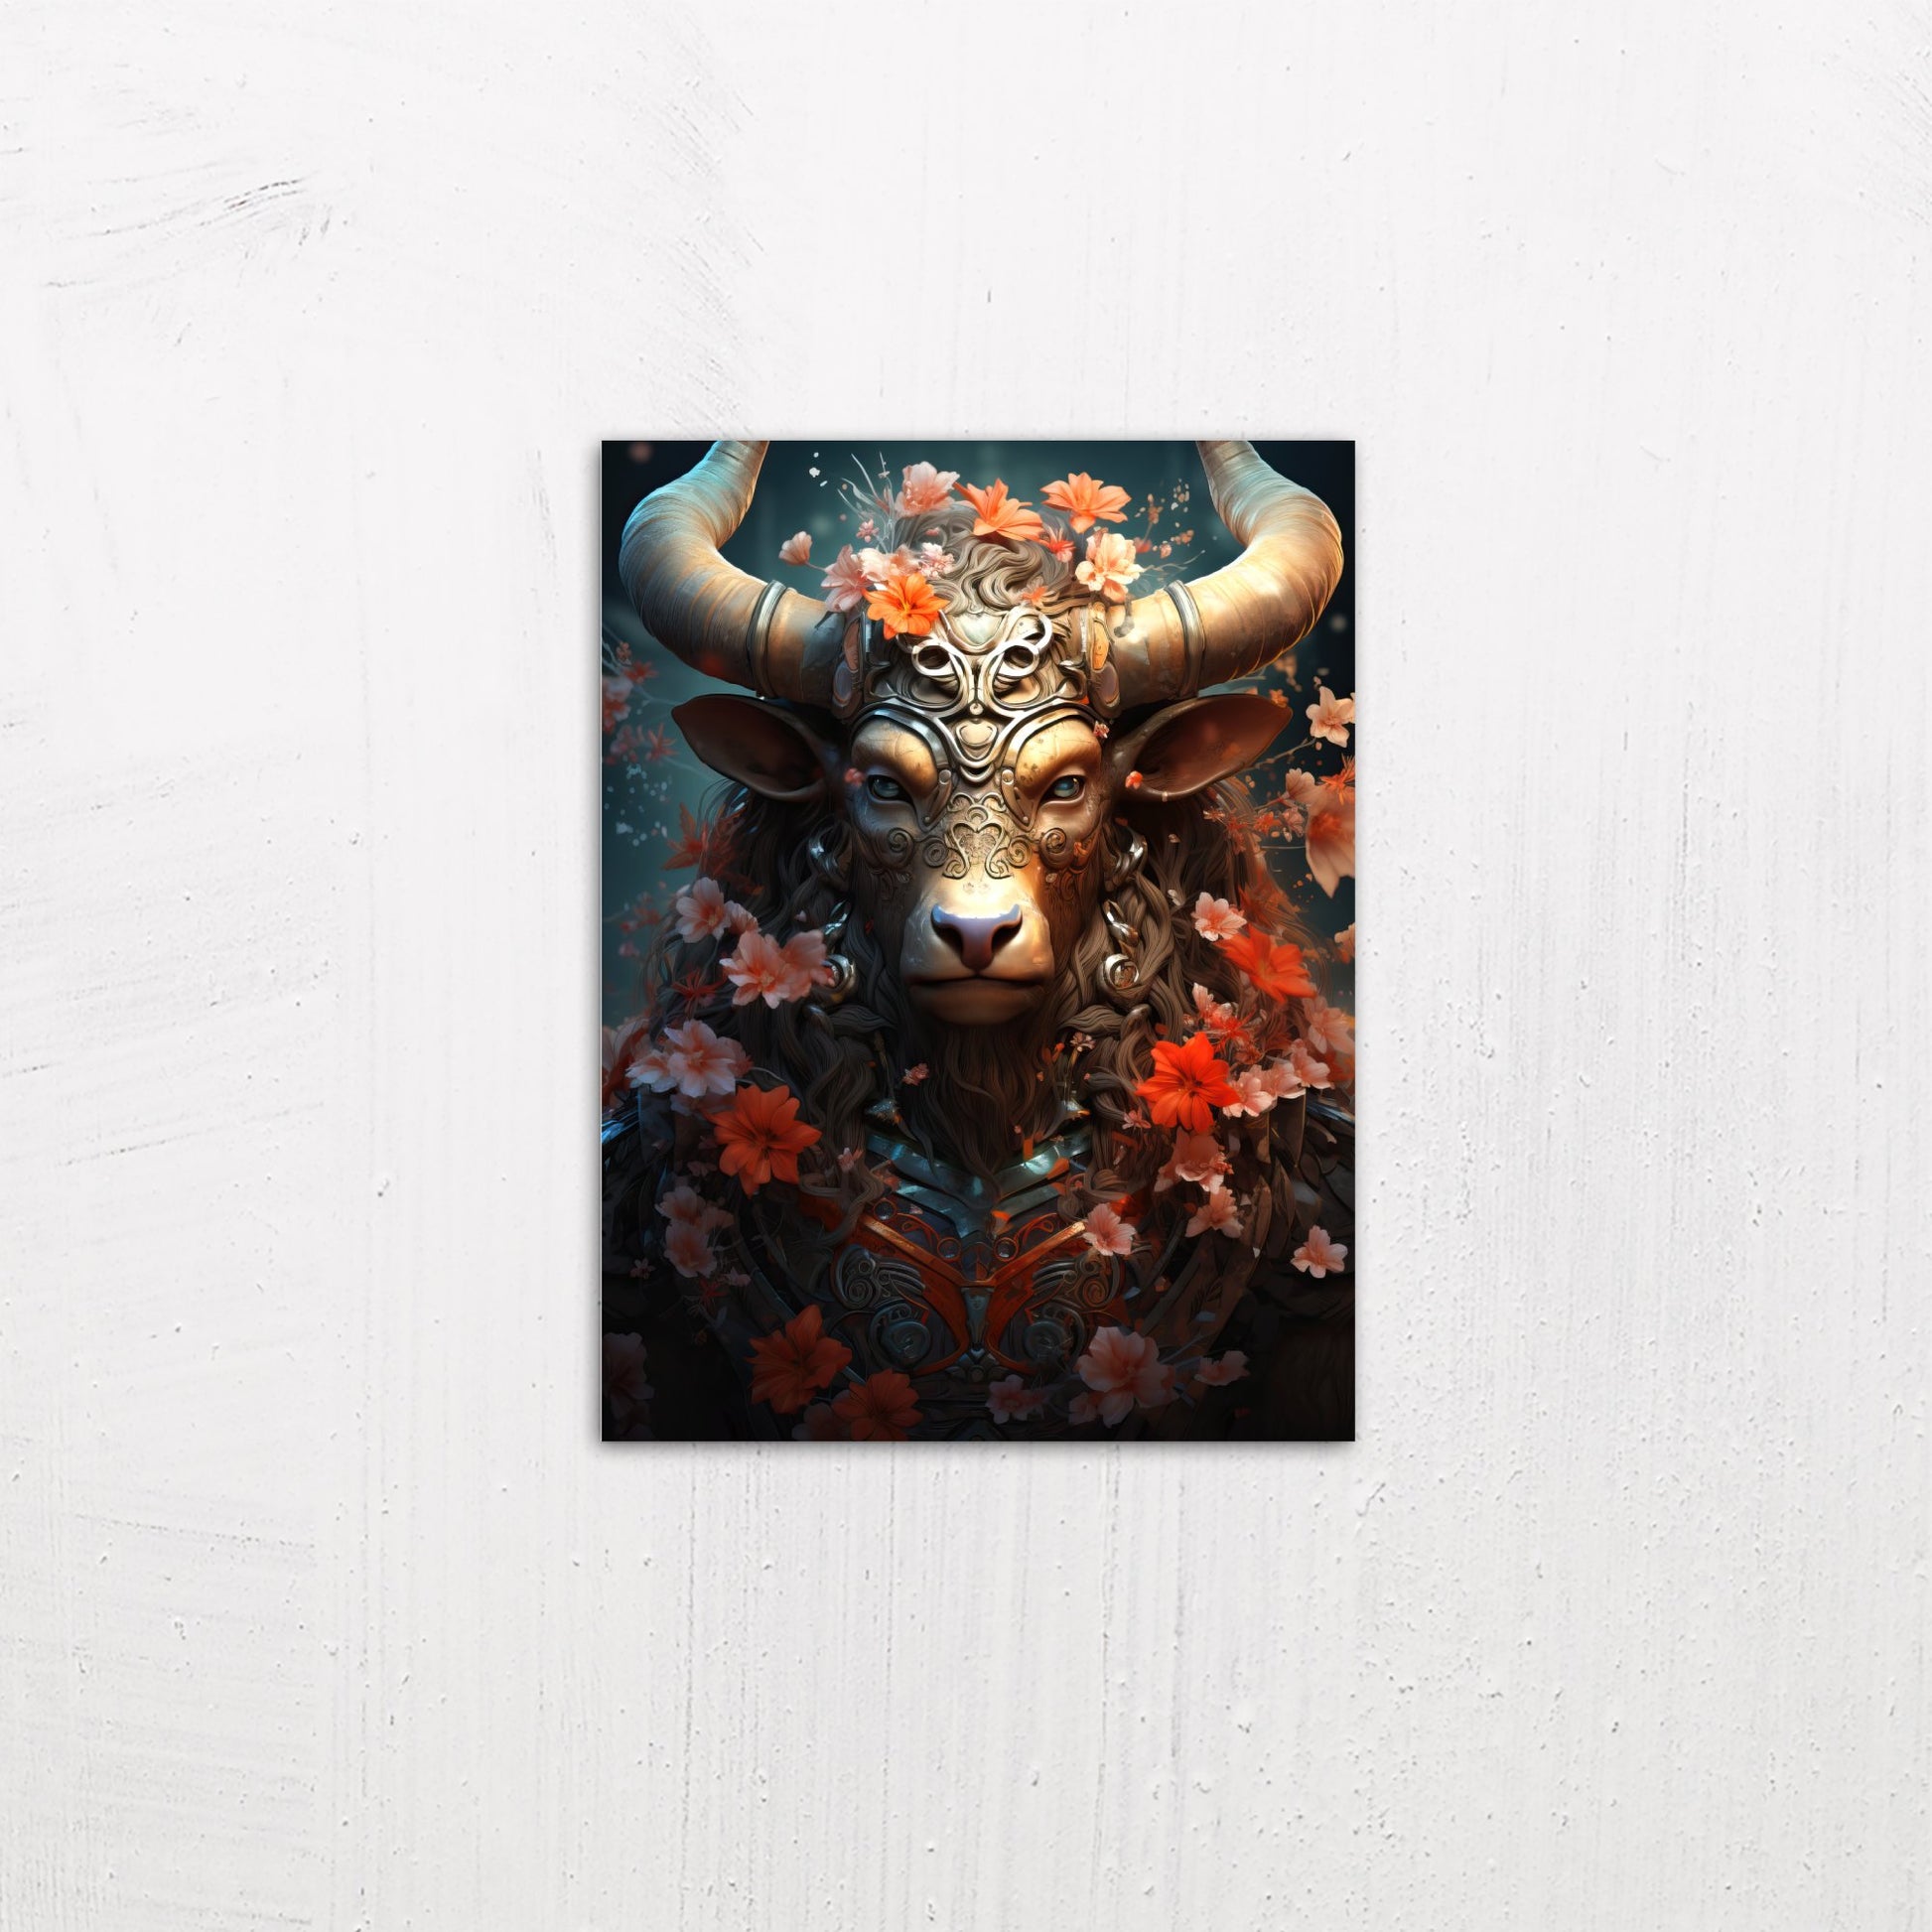 A small size metal art poster display plate with printed design of a Magical Minotaur Fantasy Painting